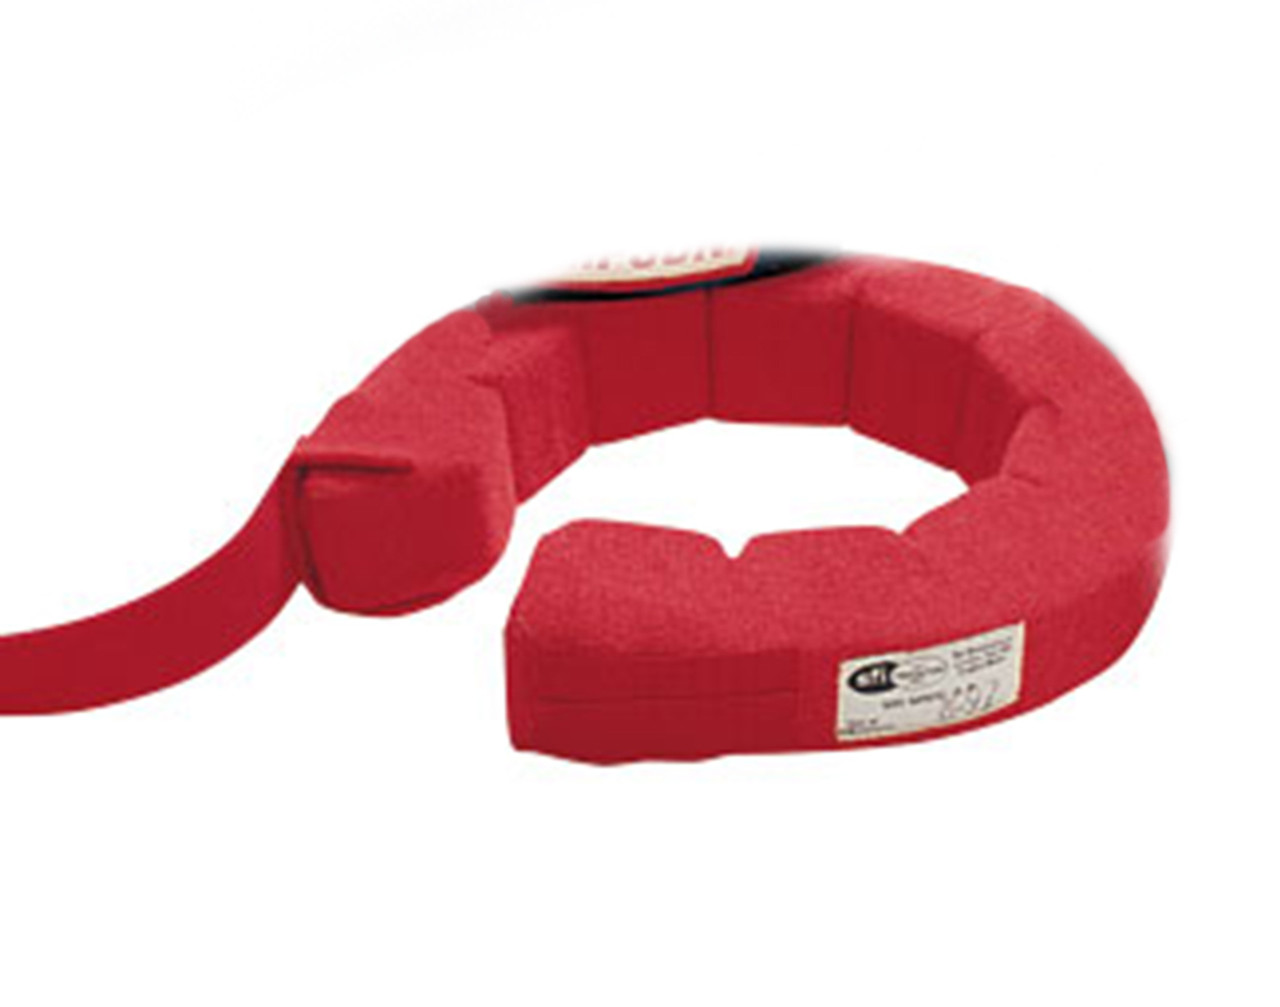 Simpson Neck Support Brace - Red Nomex Sfi racing